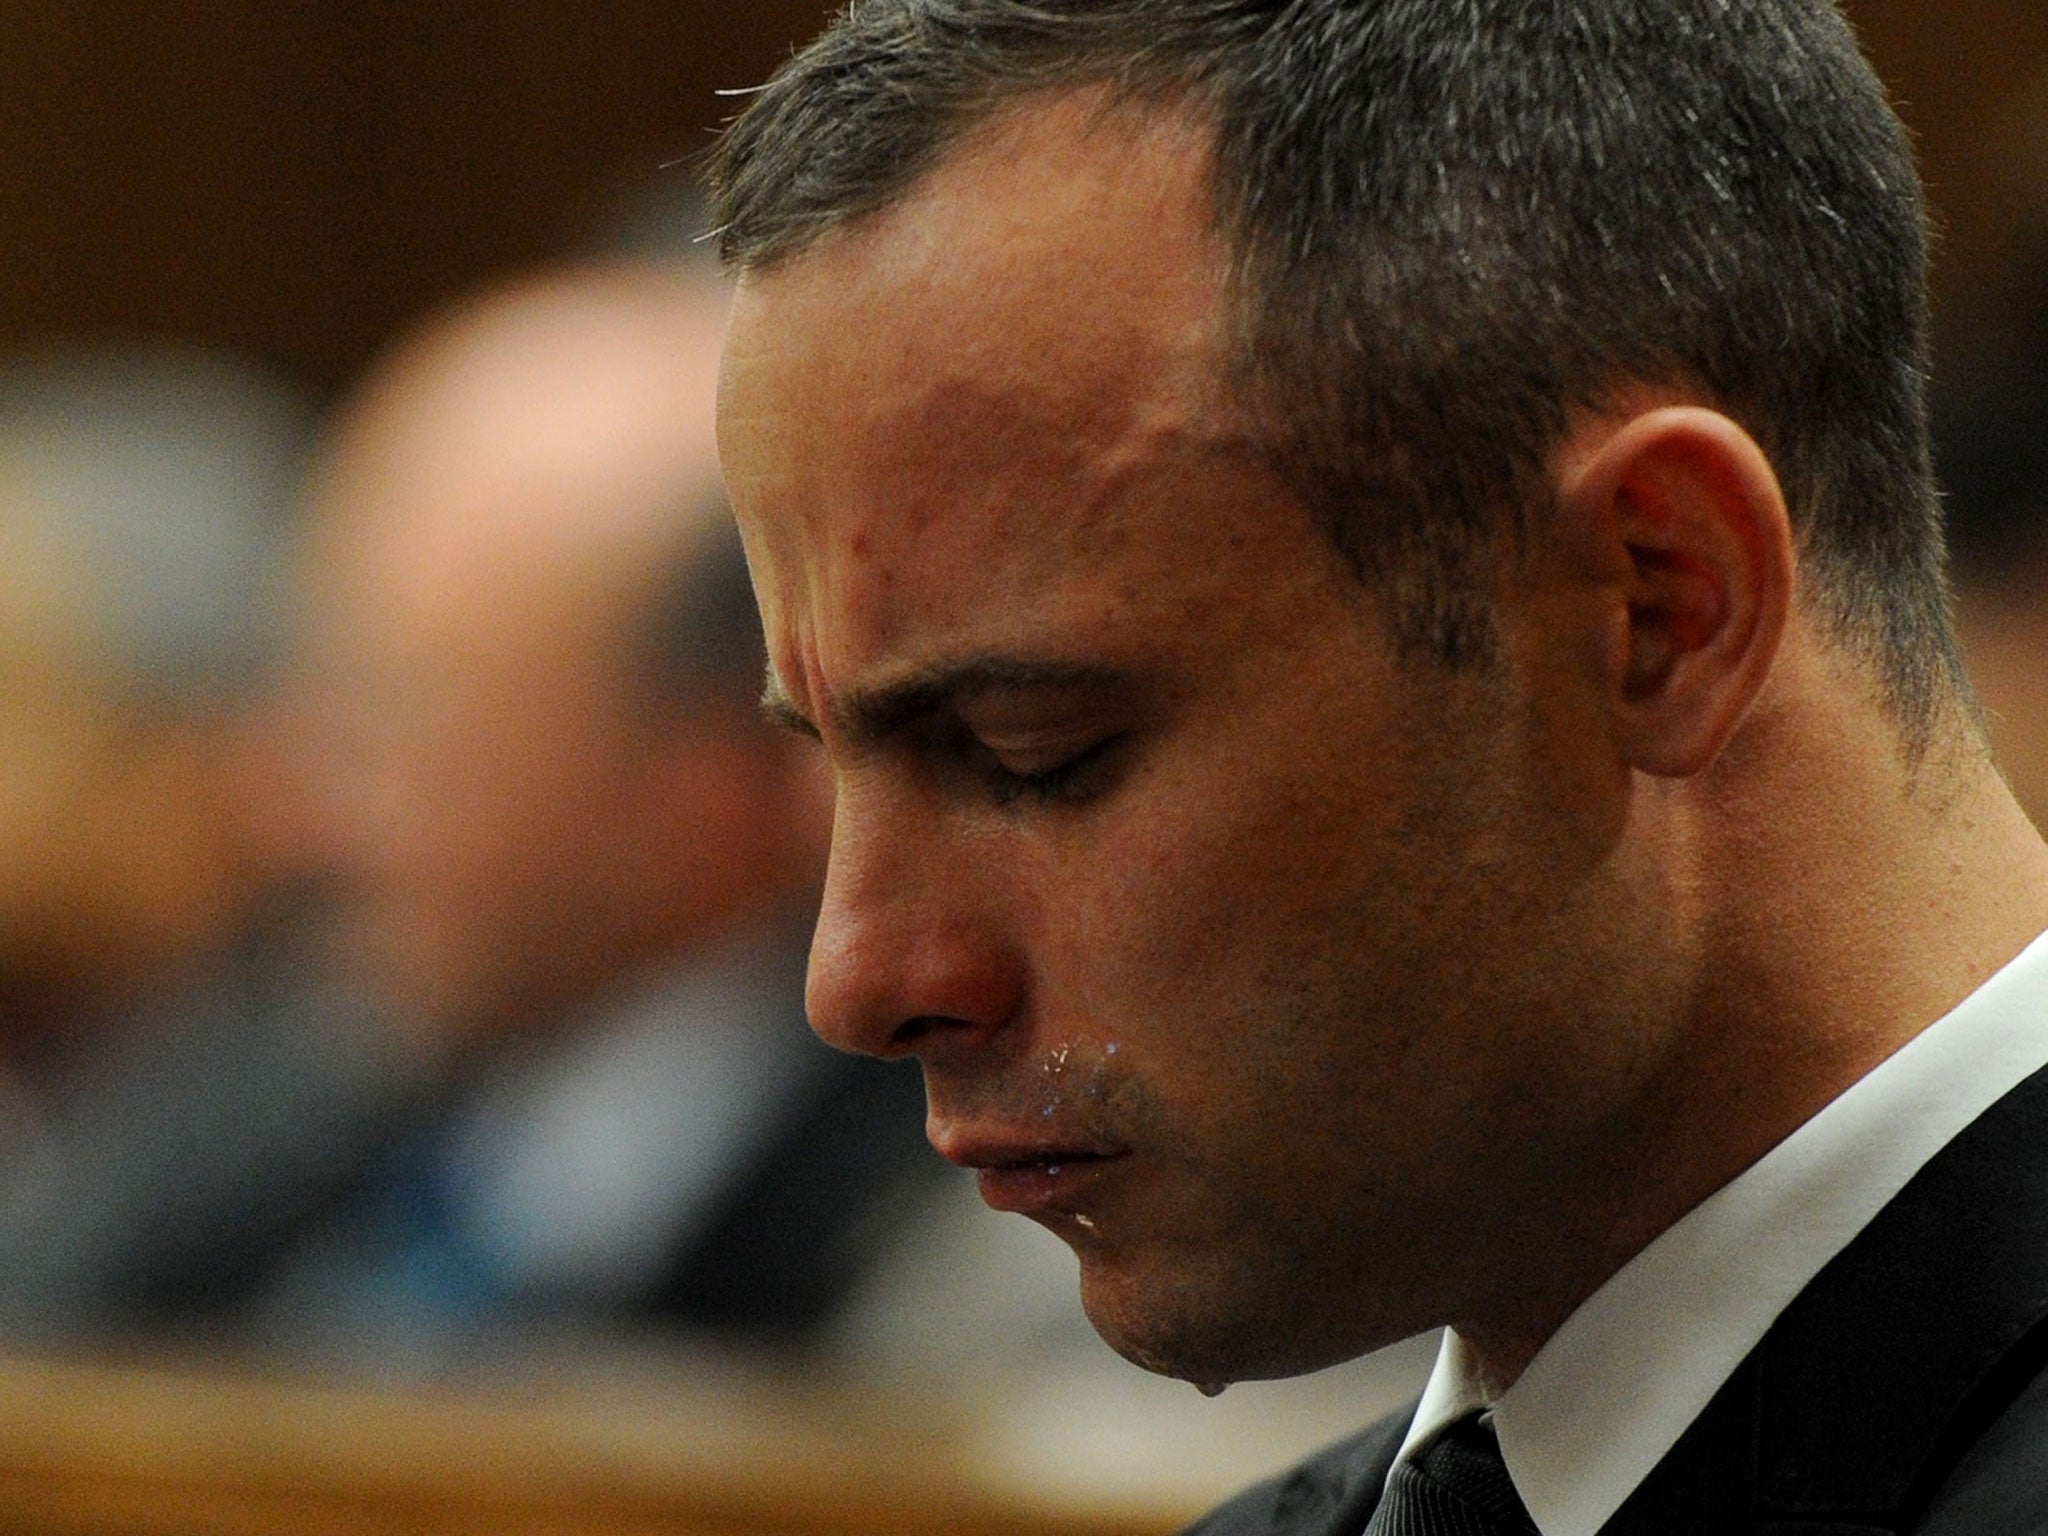 Oscar Pistorius cries during his ongoing murder trial, at the high court in Pretoria